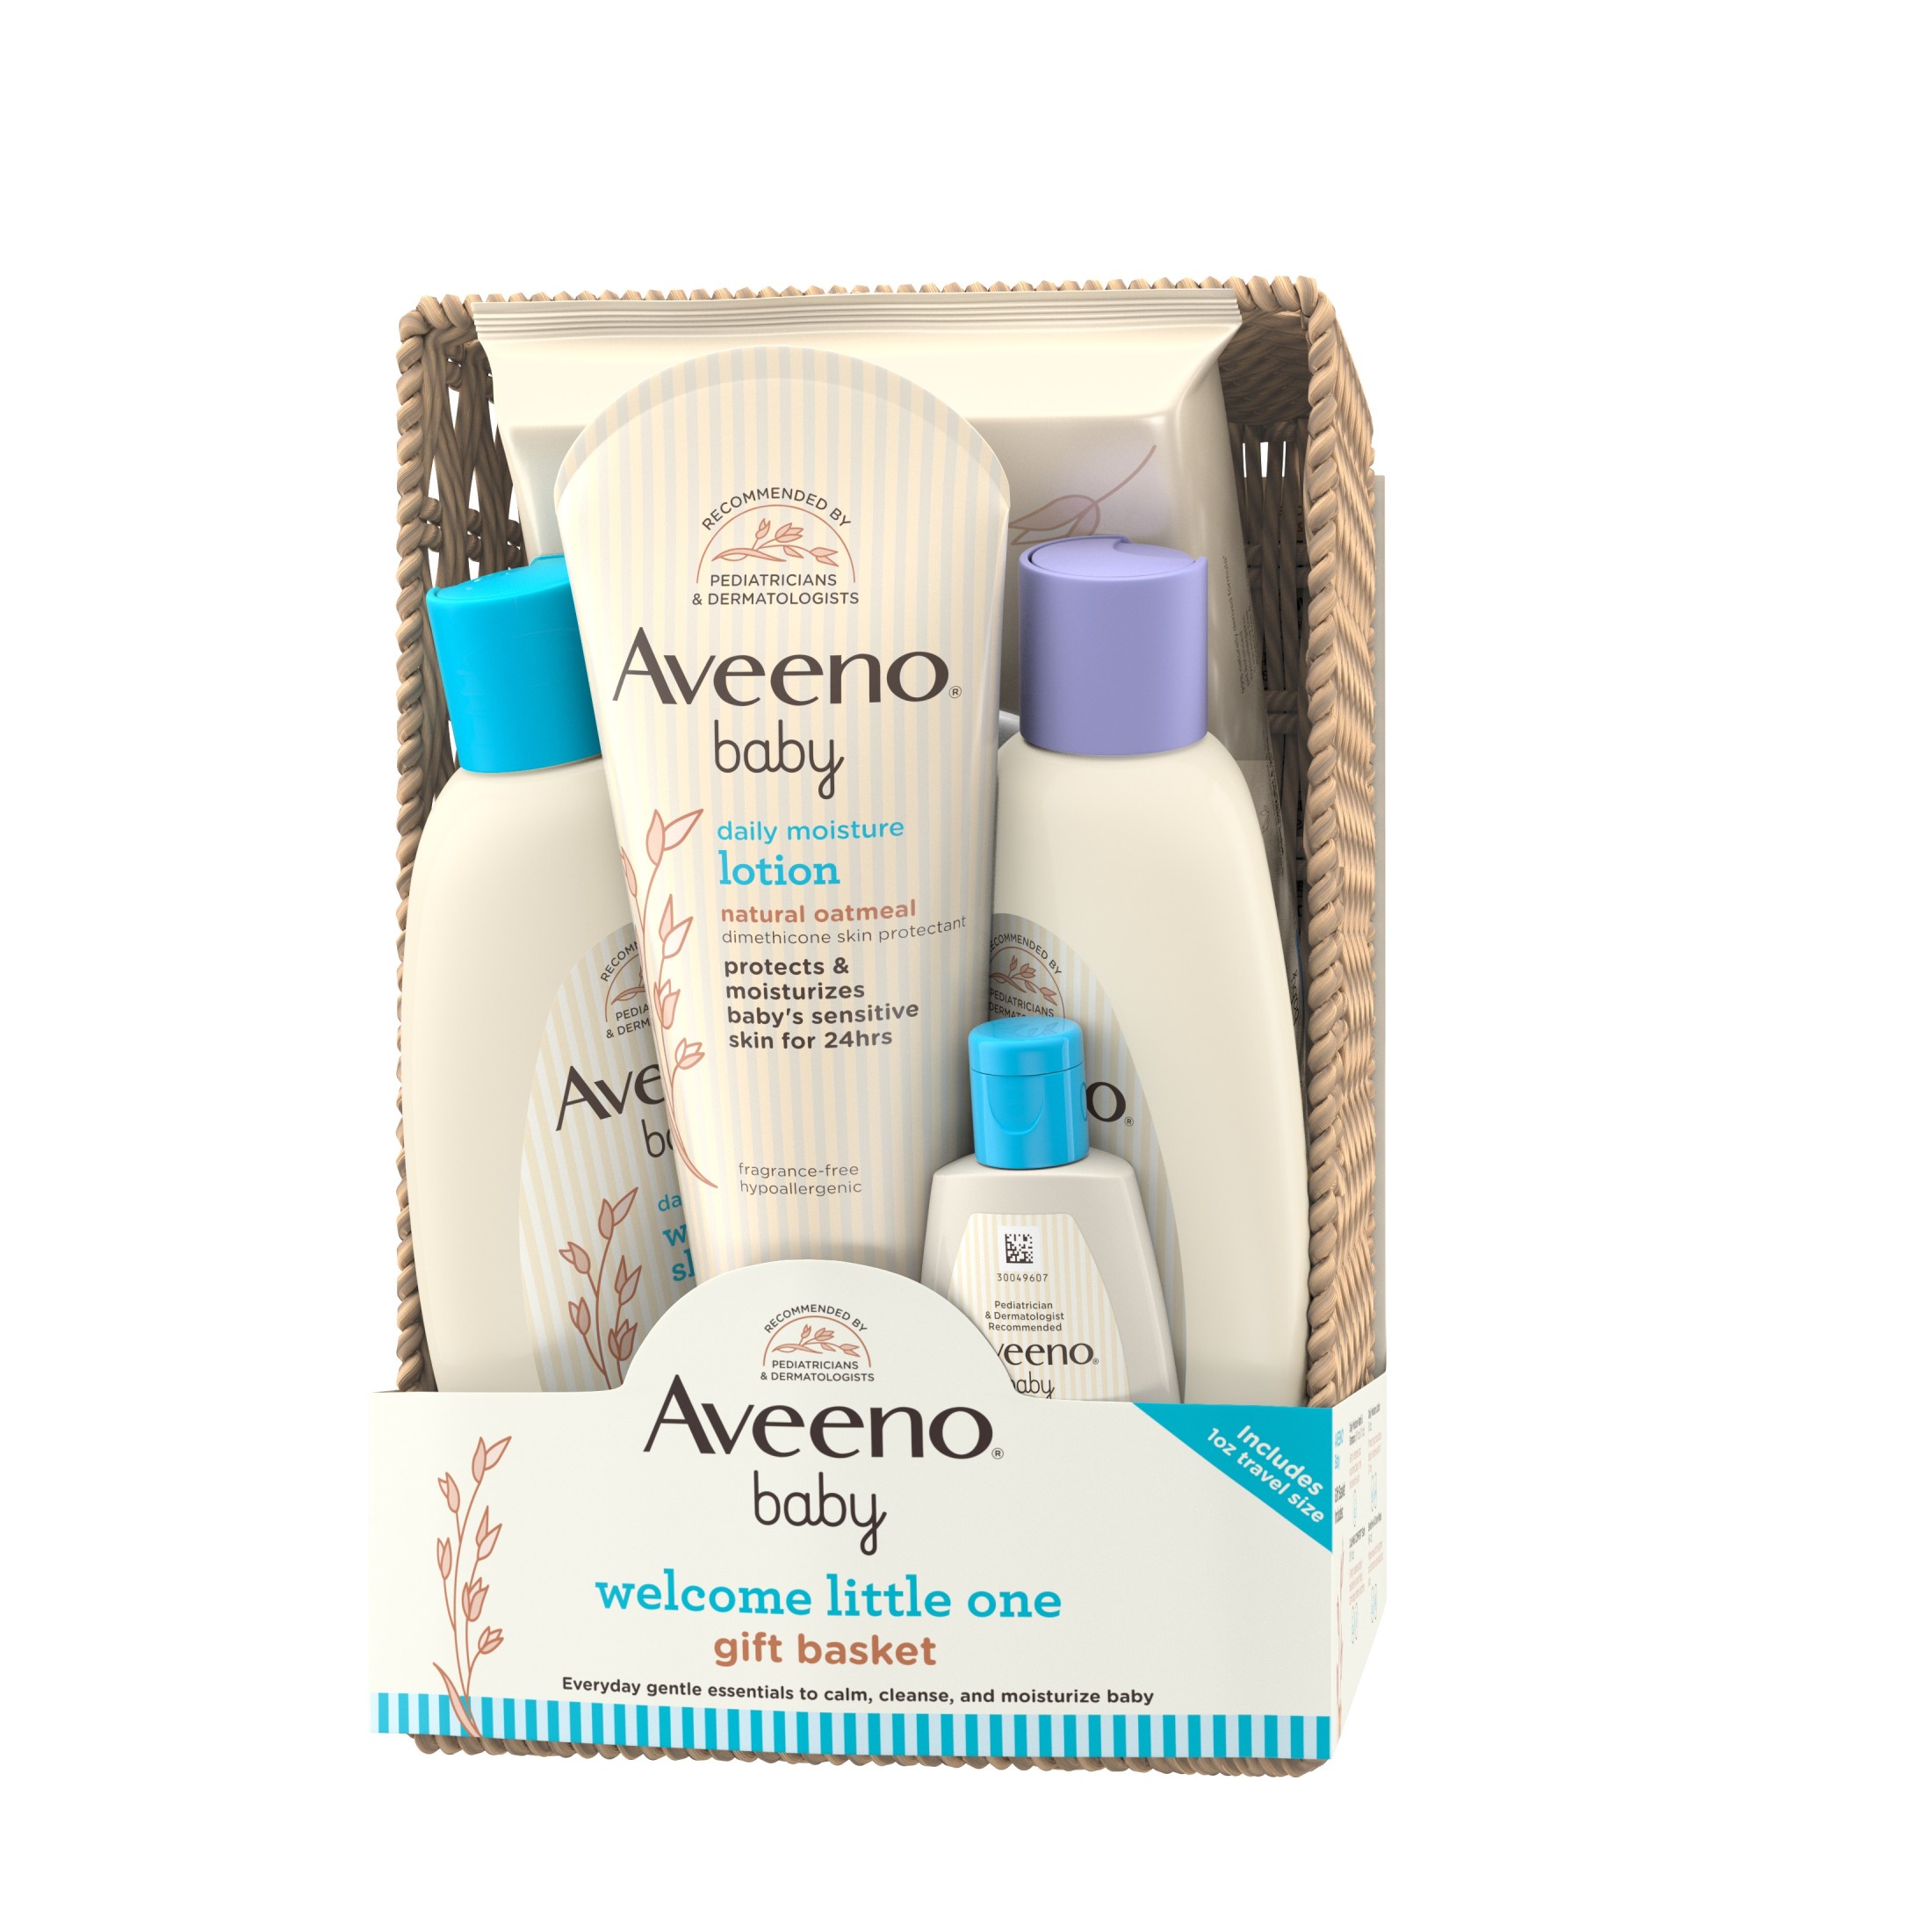 Aveeno Baby Welcome Little One Sensitive Skin Gift Set with Baby Wash, Shampoo, Wipes and Lotion, 5 full size items - image 3 of 11